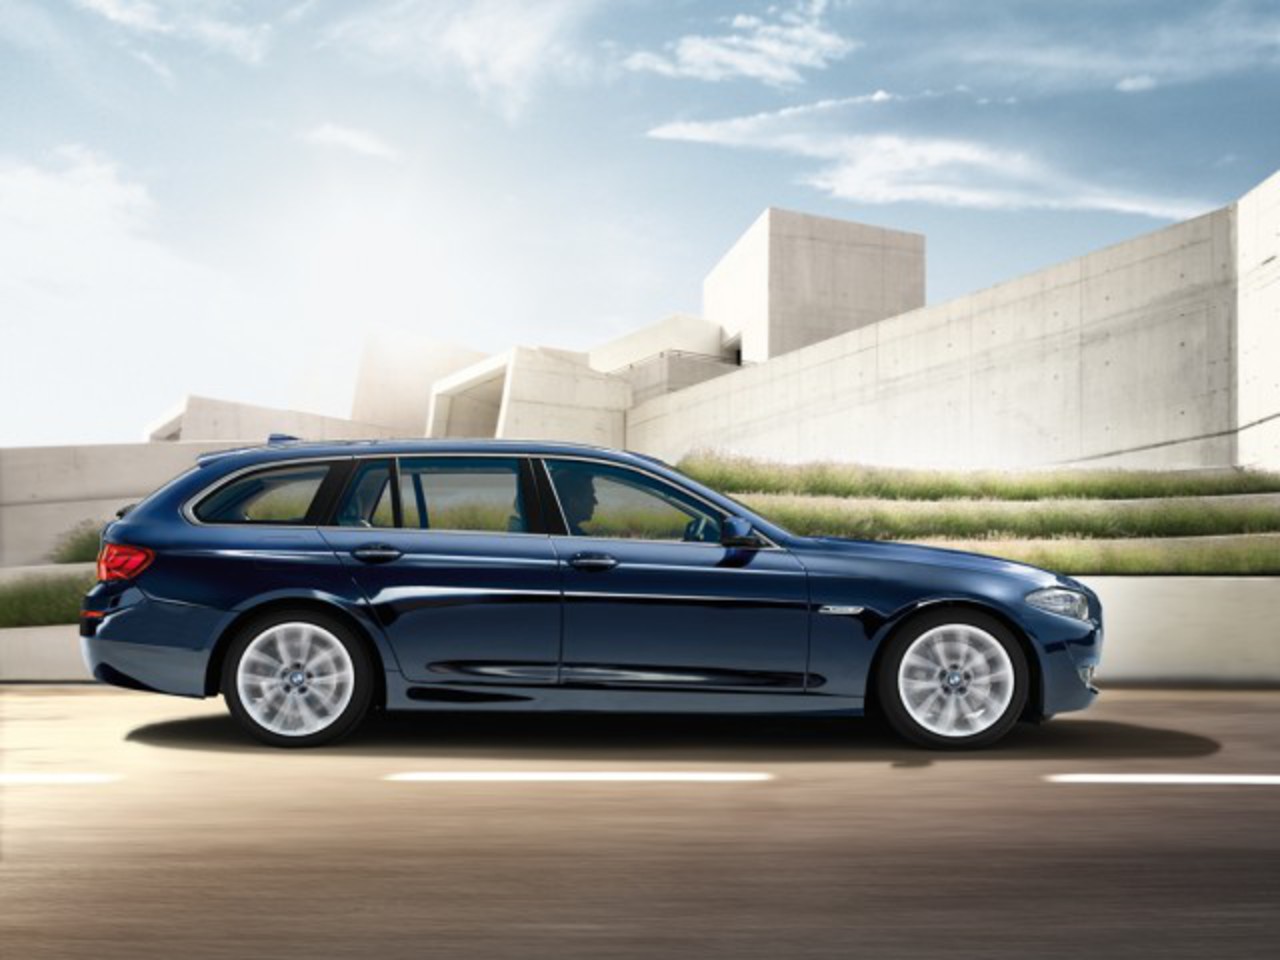 The new BMW 5 series Touring Model will reach the UK Market in September